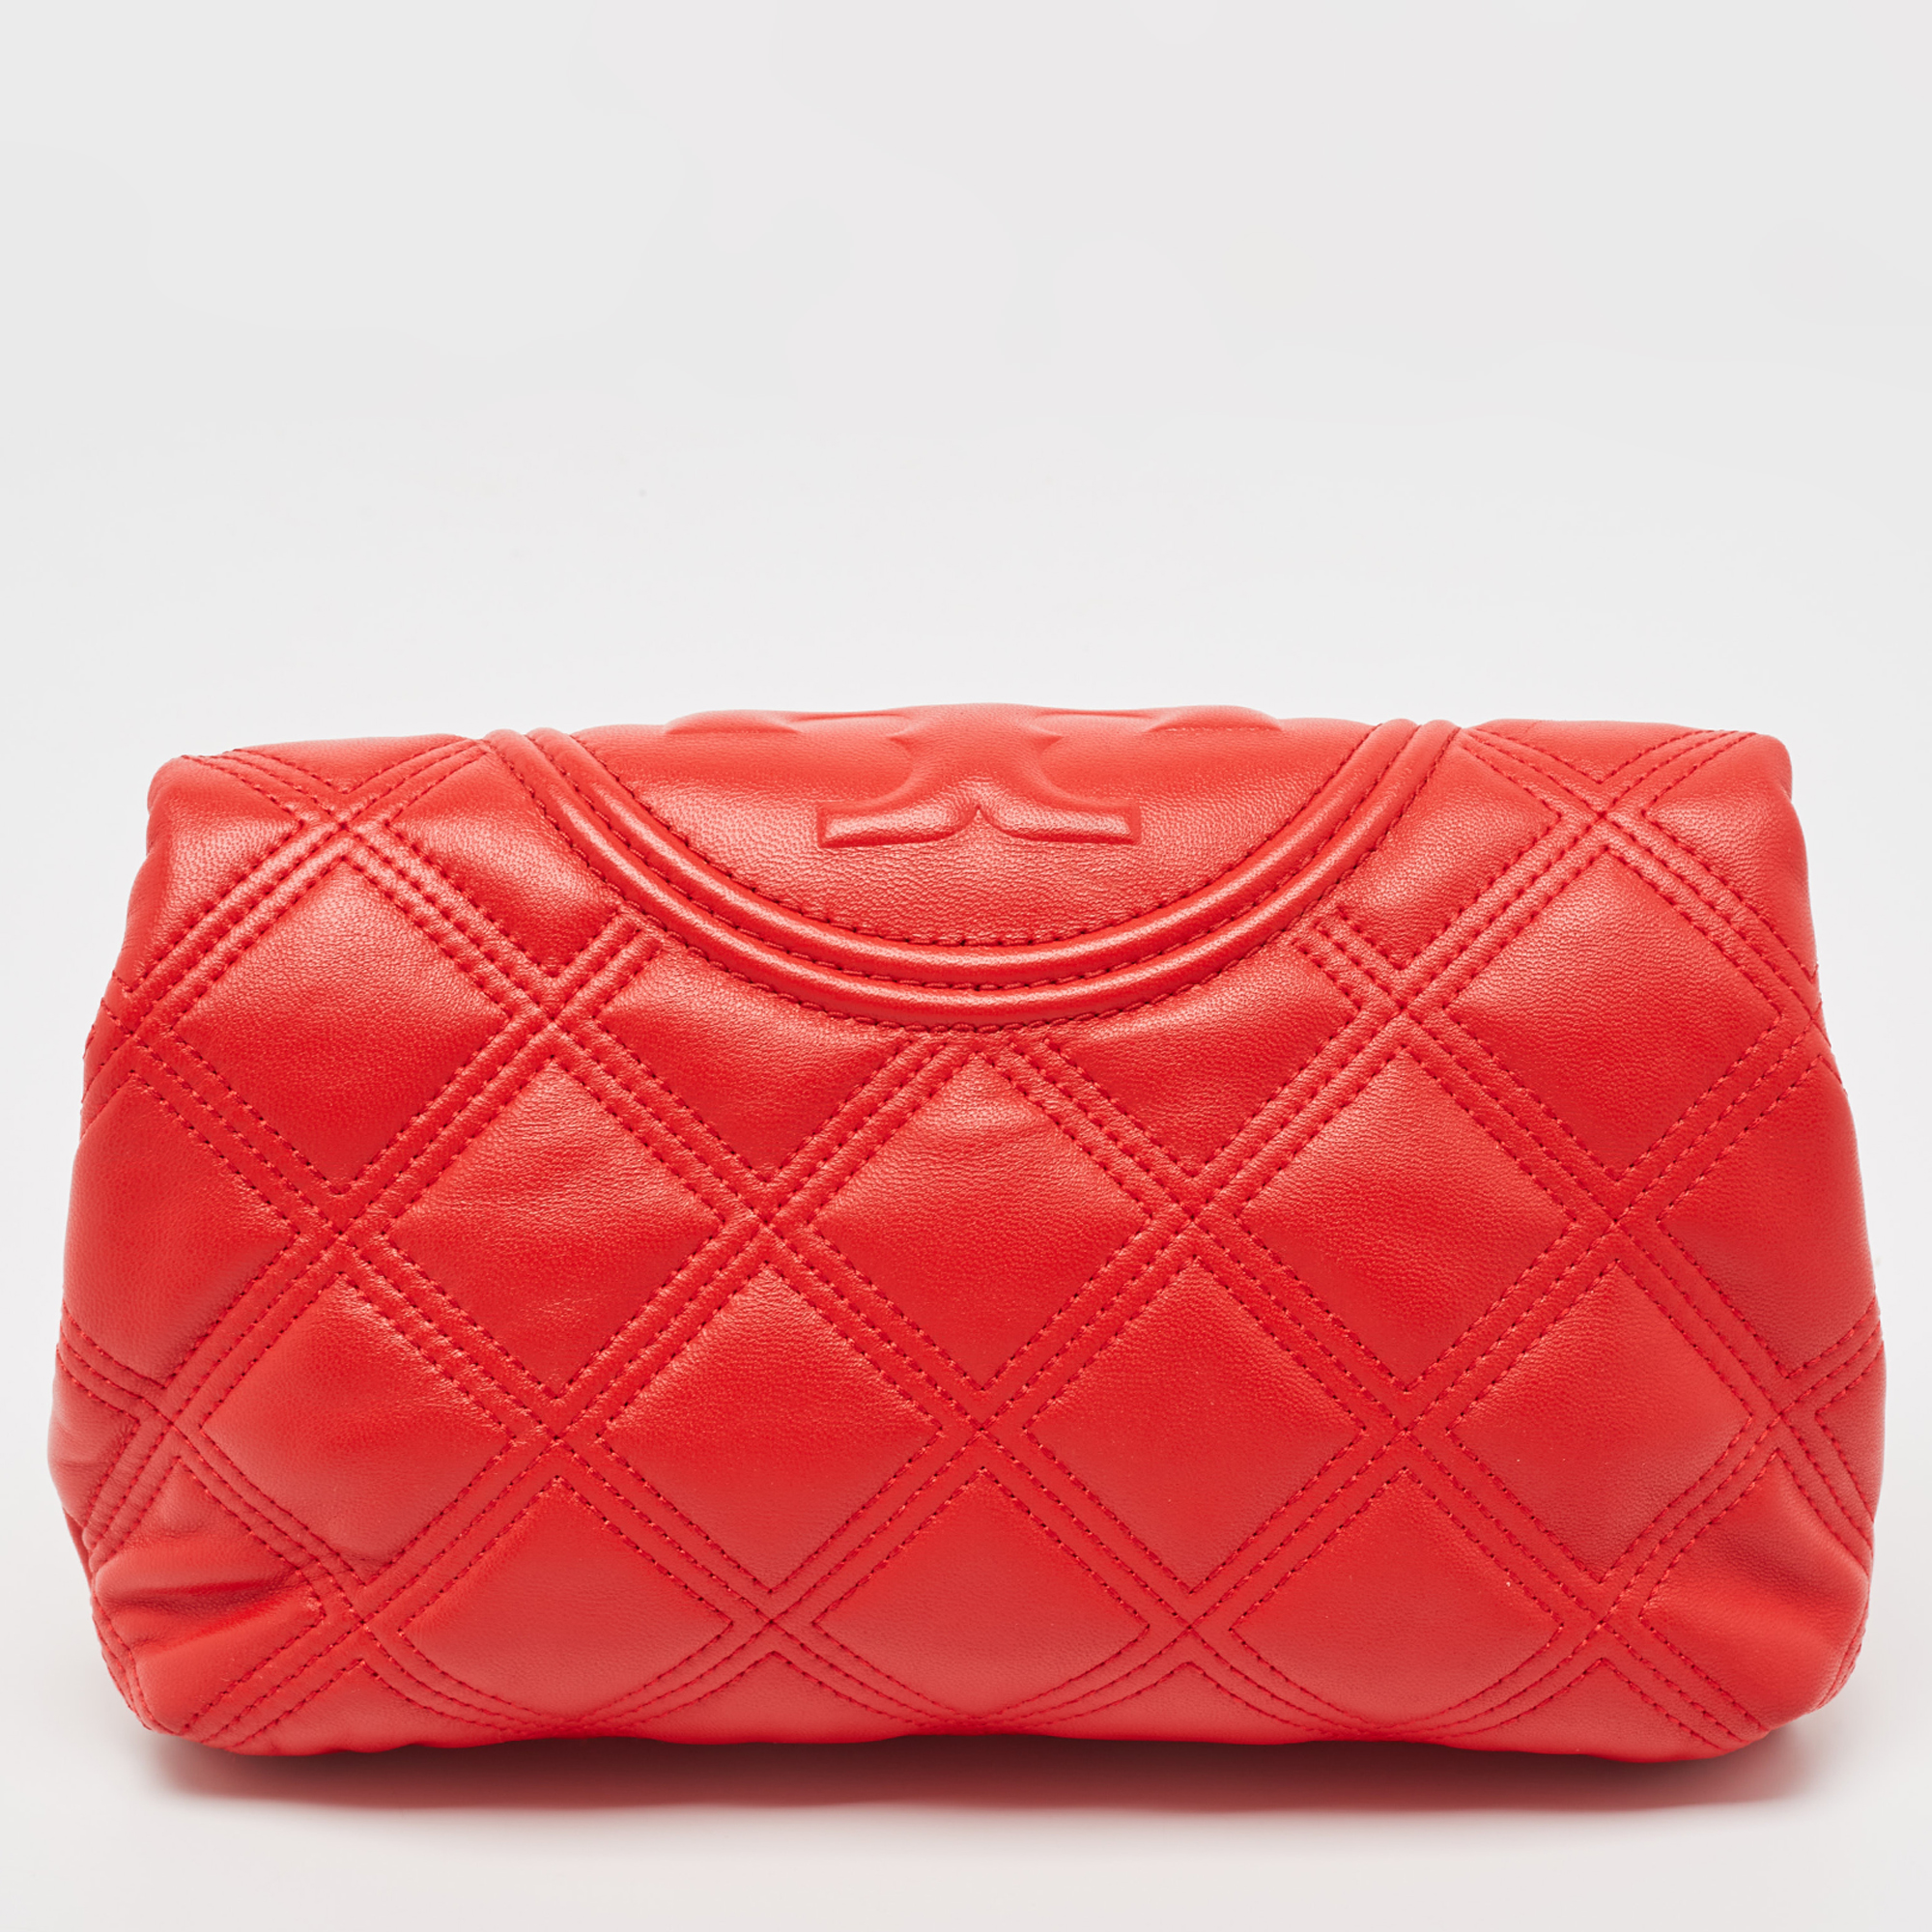 Tory Burch Red Quilted Leather Fleming Clutch